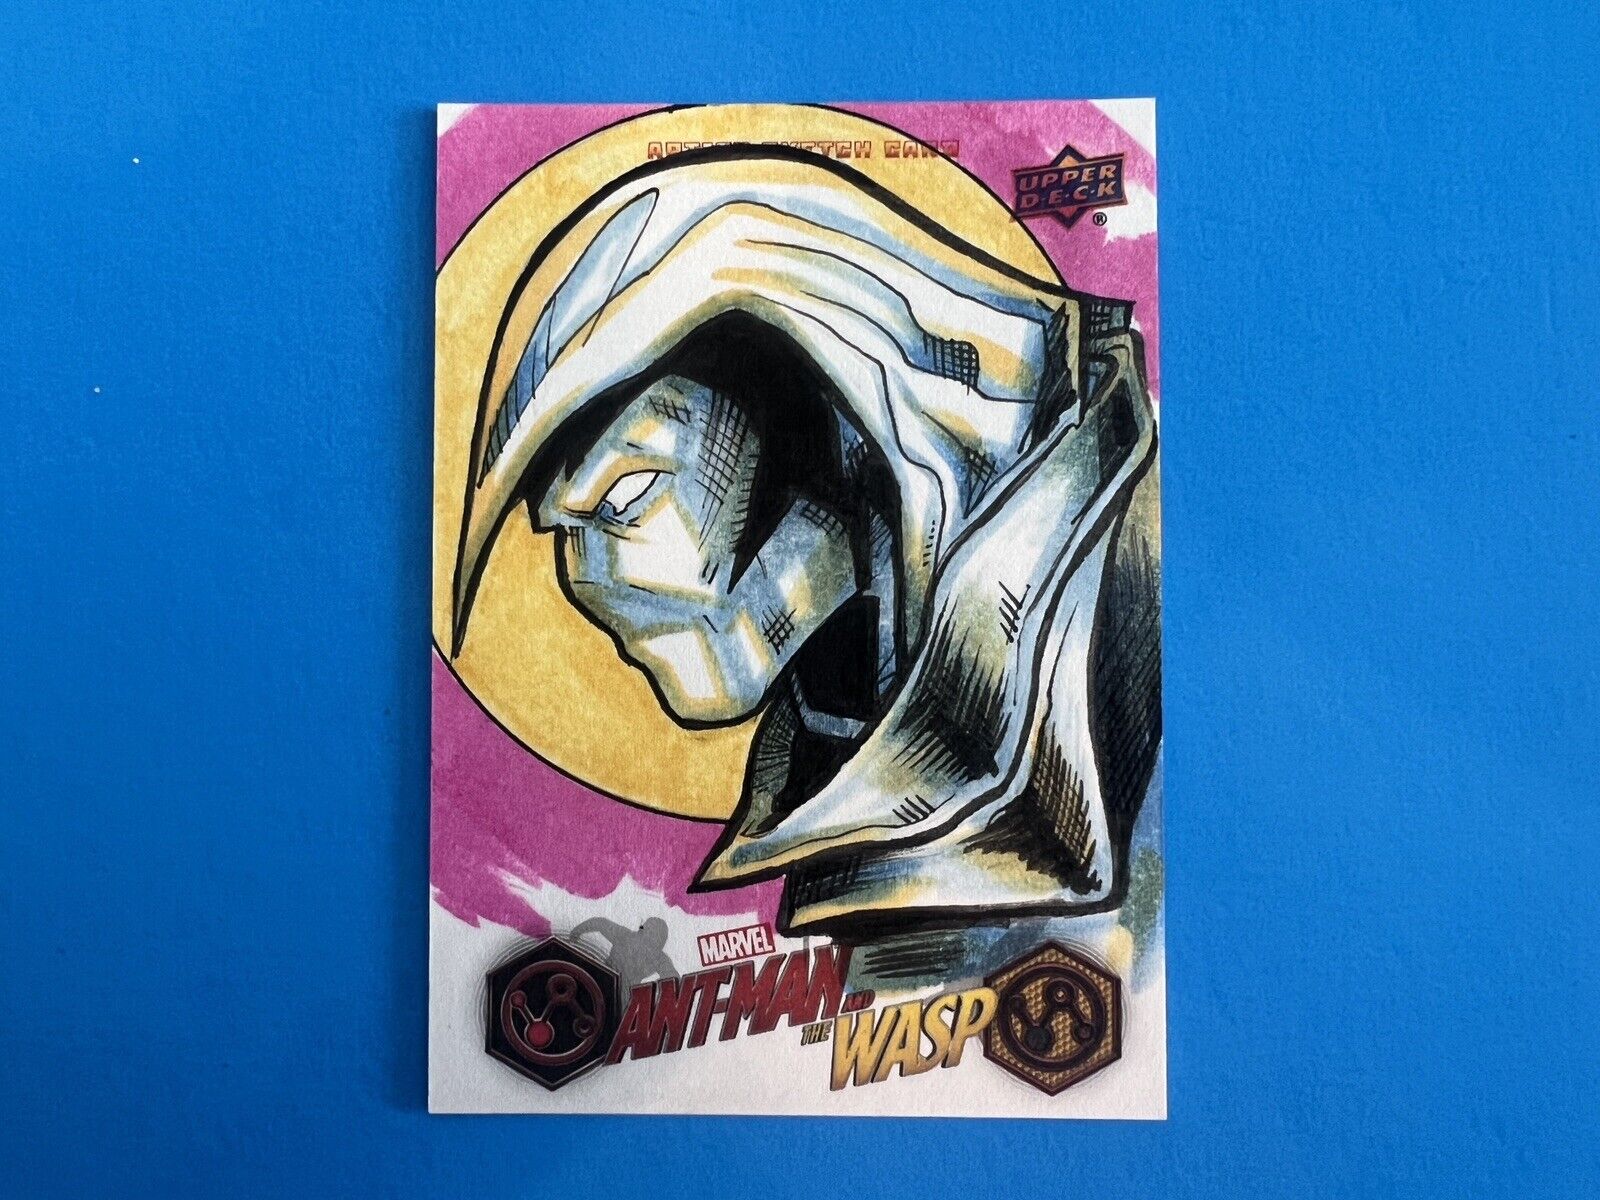 2018 UPPER DECK ANT-MAN AND THE WASP SKETCH CARD #1/1 CHRIS WILLDIG SIGNED AUTO